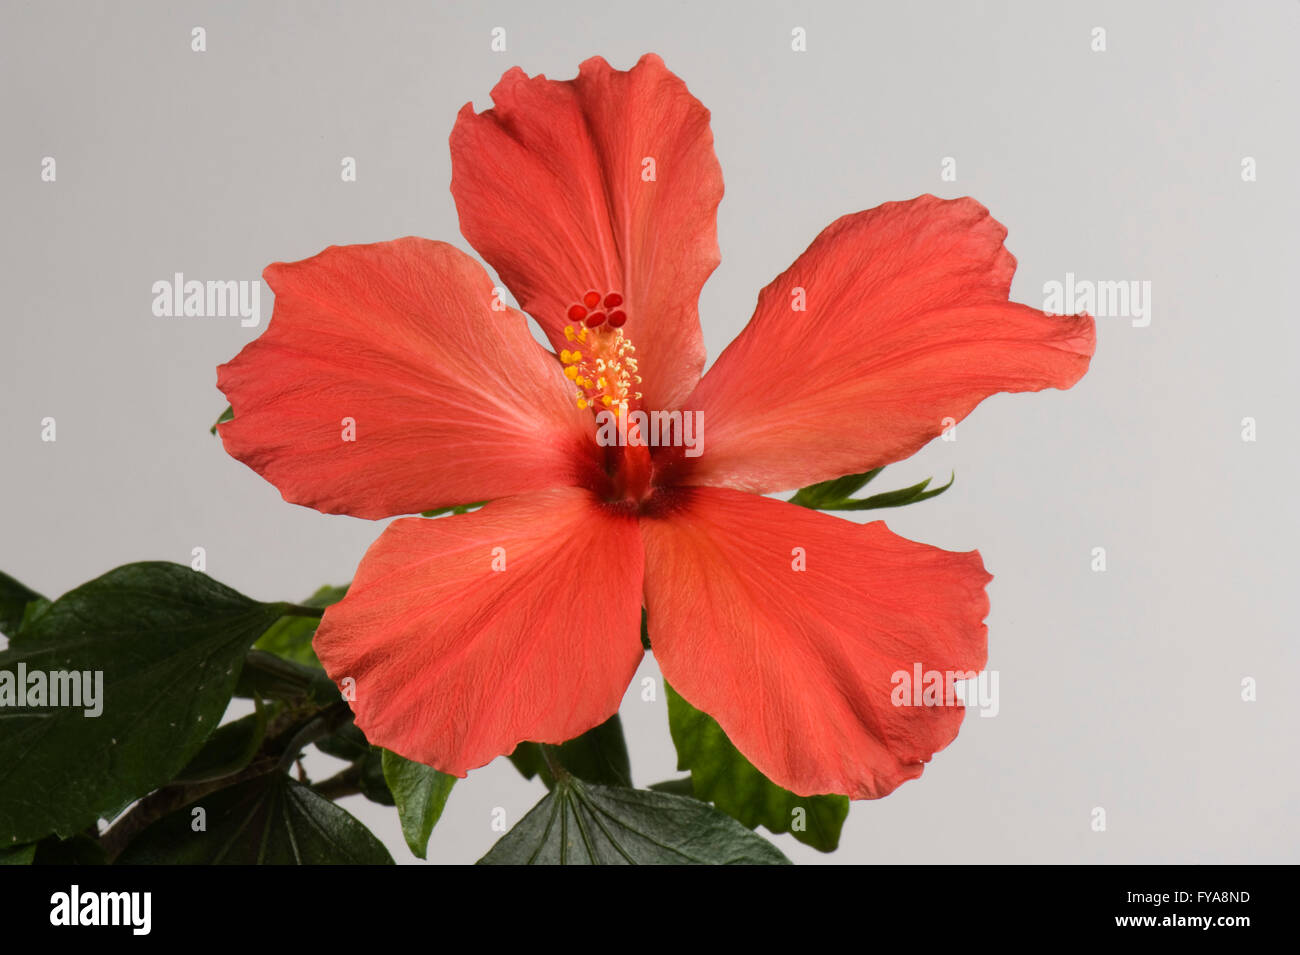 Red flower of an Hibiscus house plant, Hibiscus rosa-sinensis, showing stigma and anthers Stock Photo